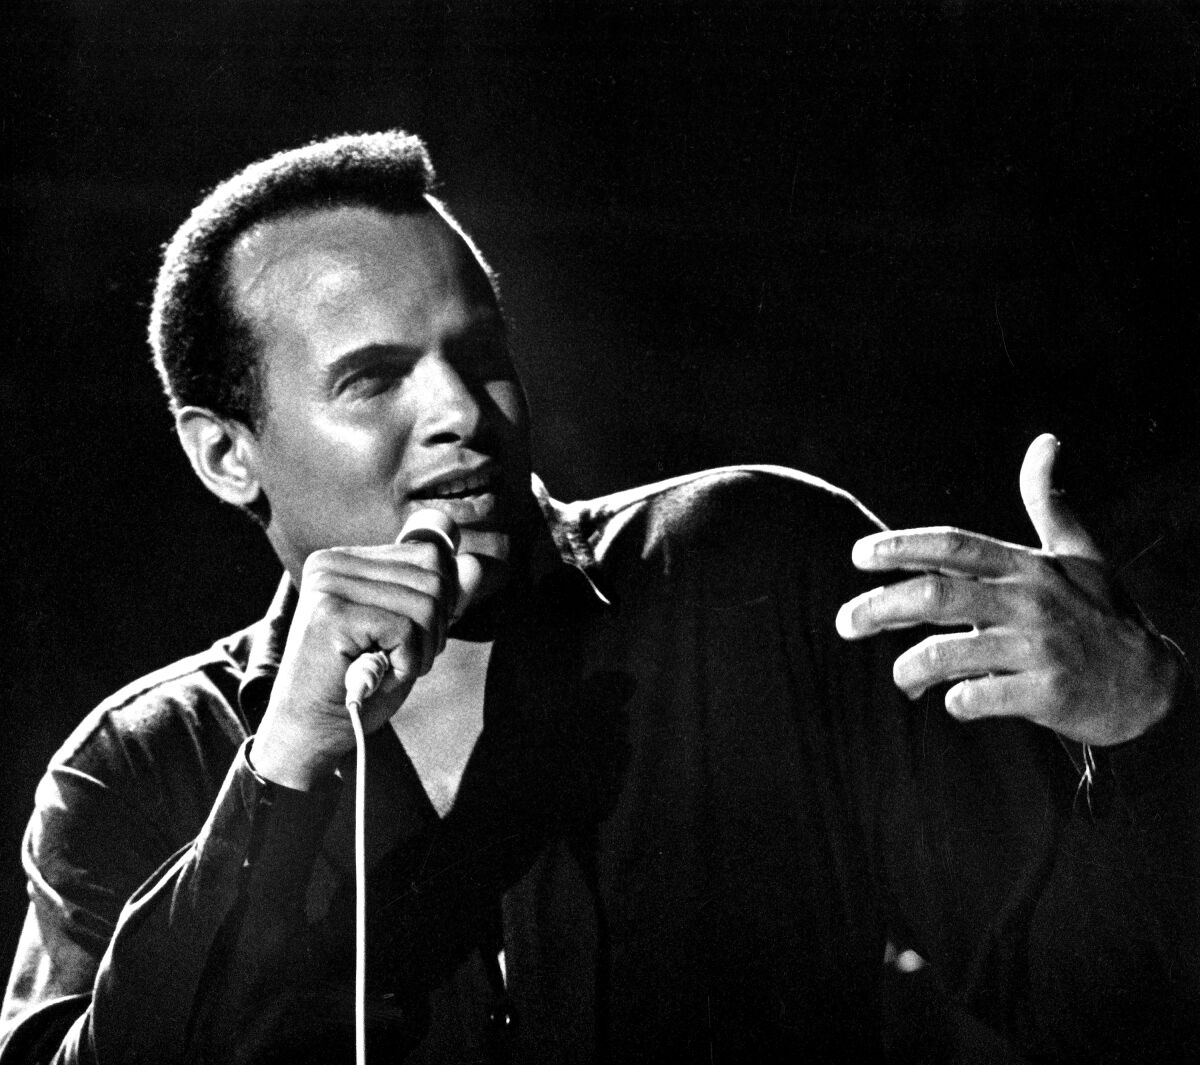 Singer Harry Belafonte performs at International Radio and Television Society Anniversary Gala on March 9, 1967 n NY